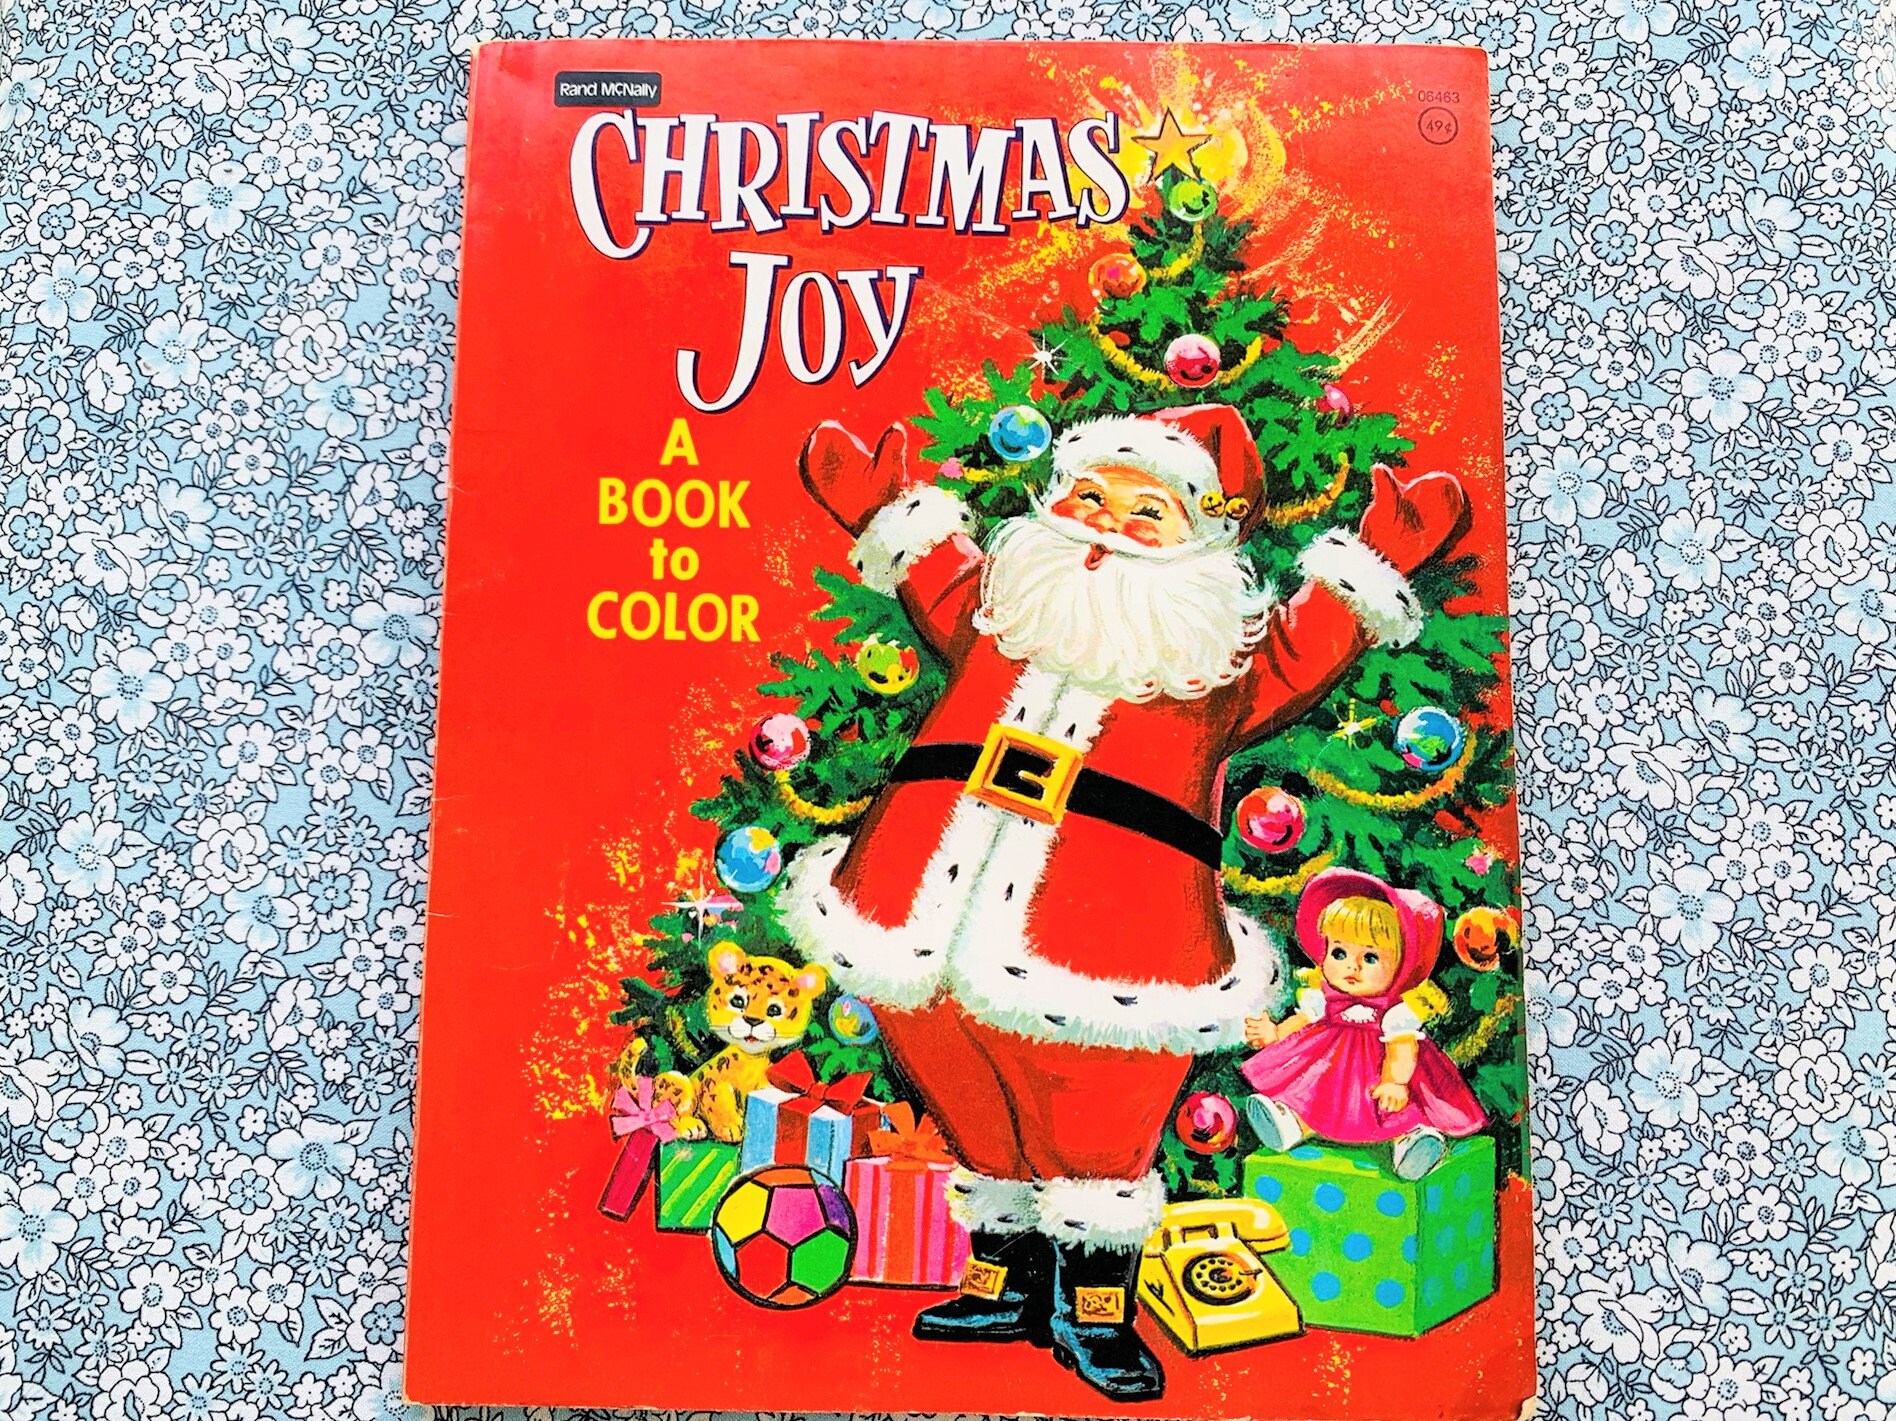 Vintage 1975 Santas Toy Shop  Paint With Water Christmas Coloring Book~  New